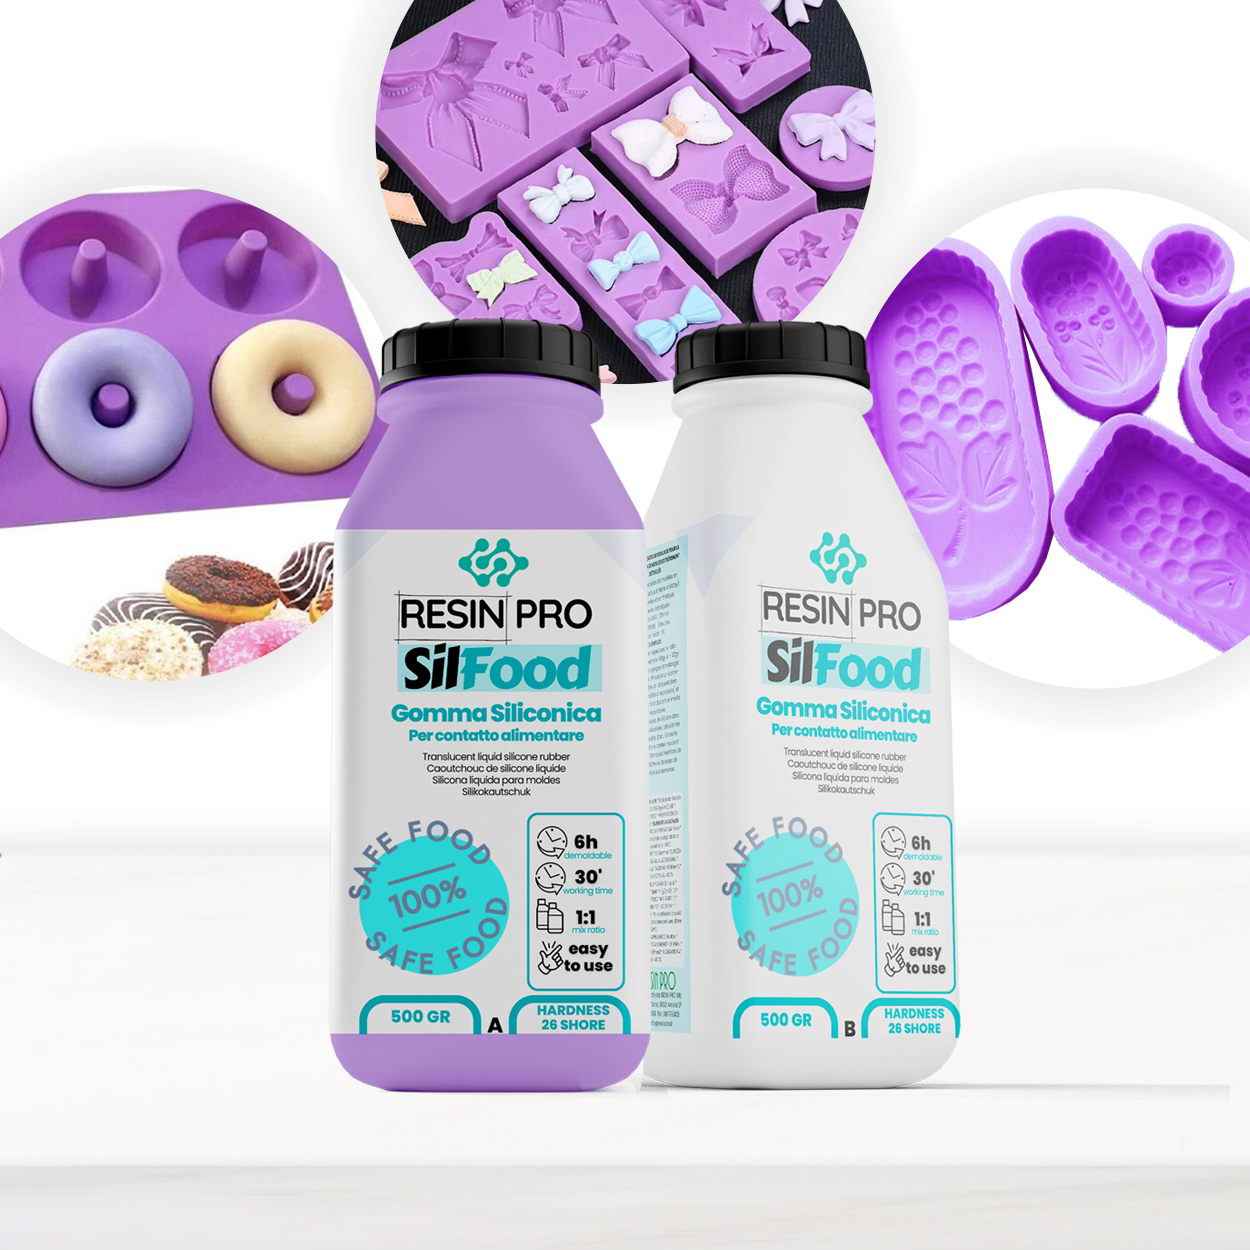 SIL FOOD Food-grade silicone for molds - Create in the Kitchen too! -  ResinPro - Creativity at your service